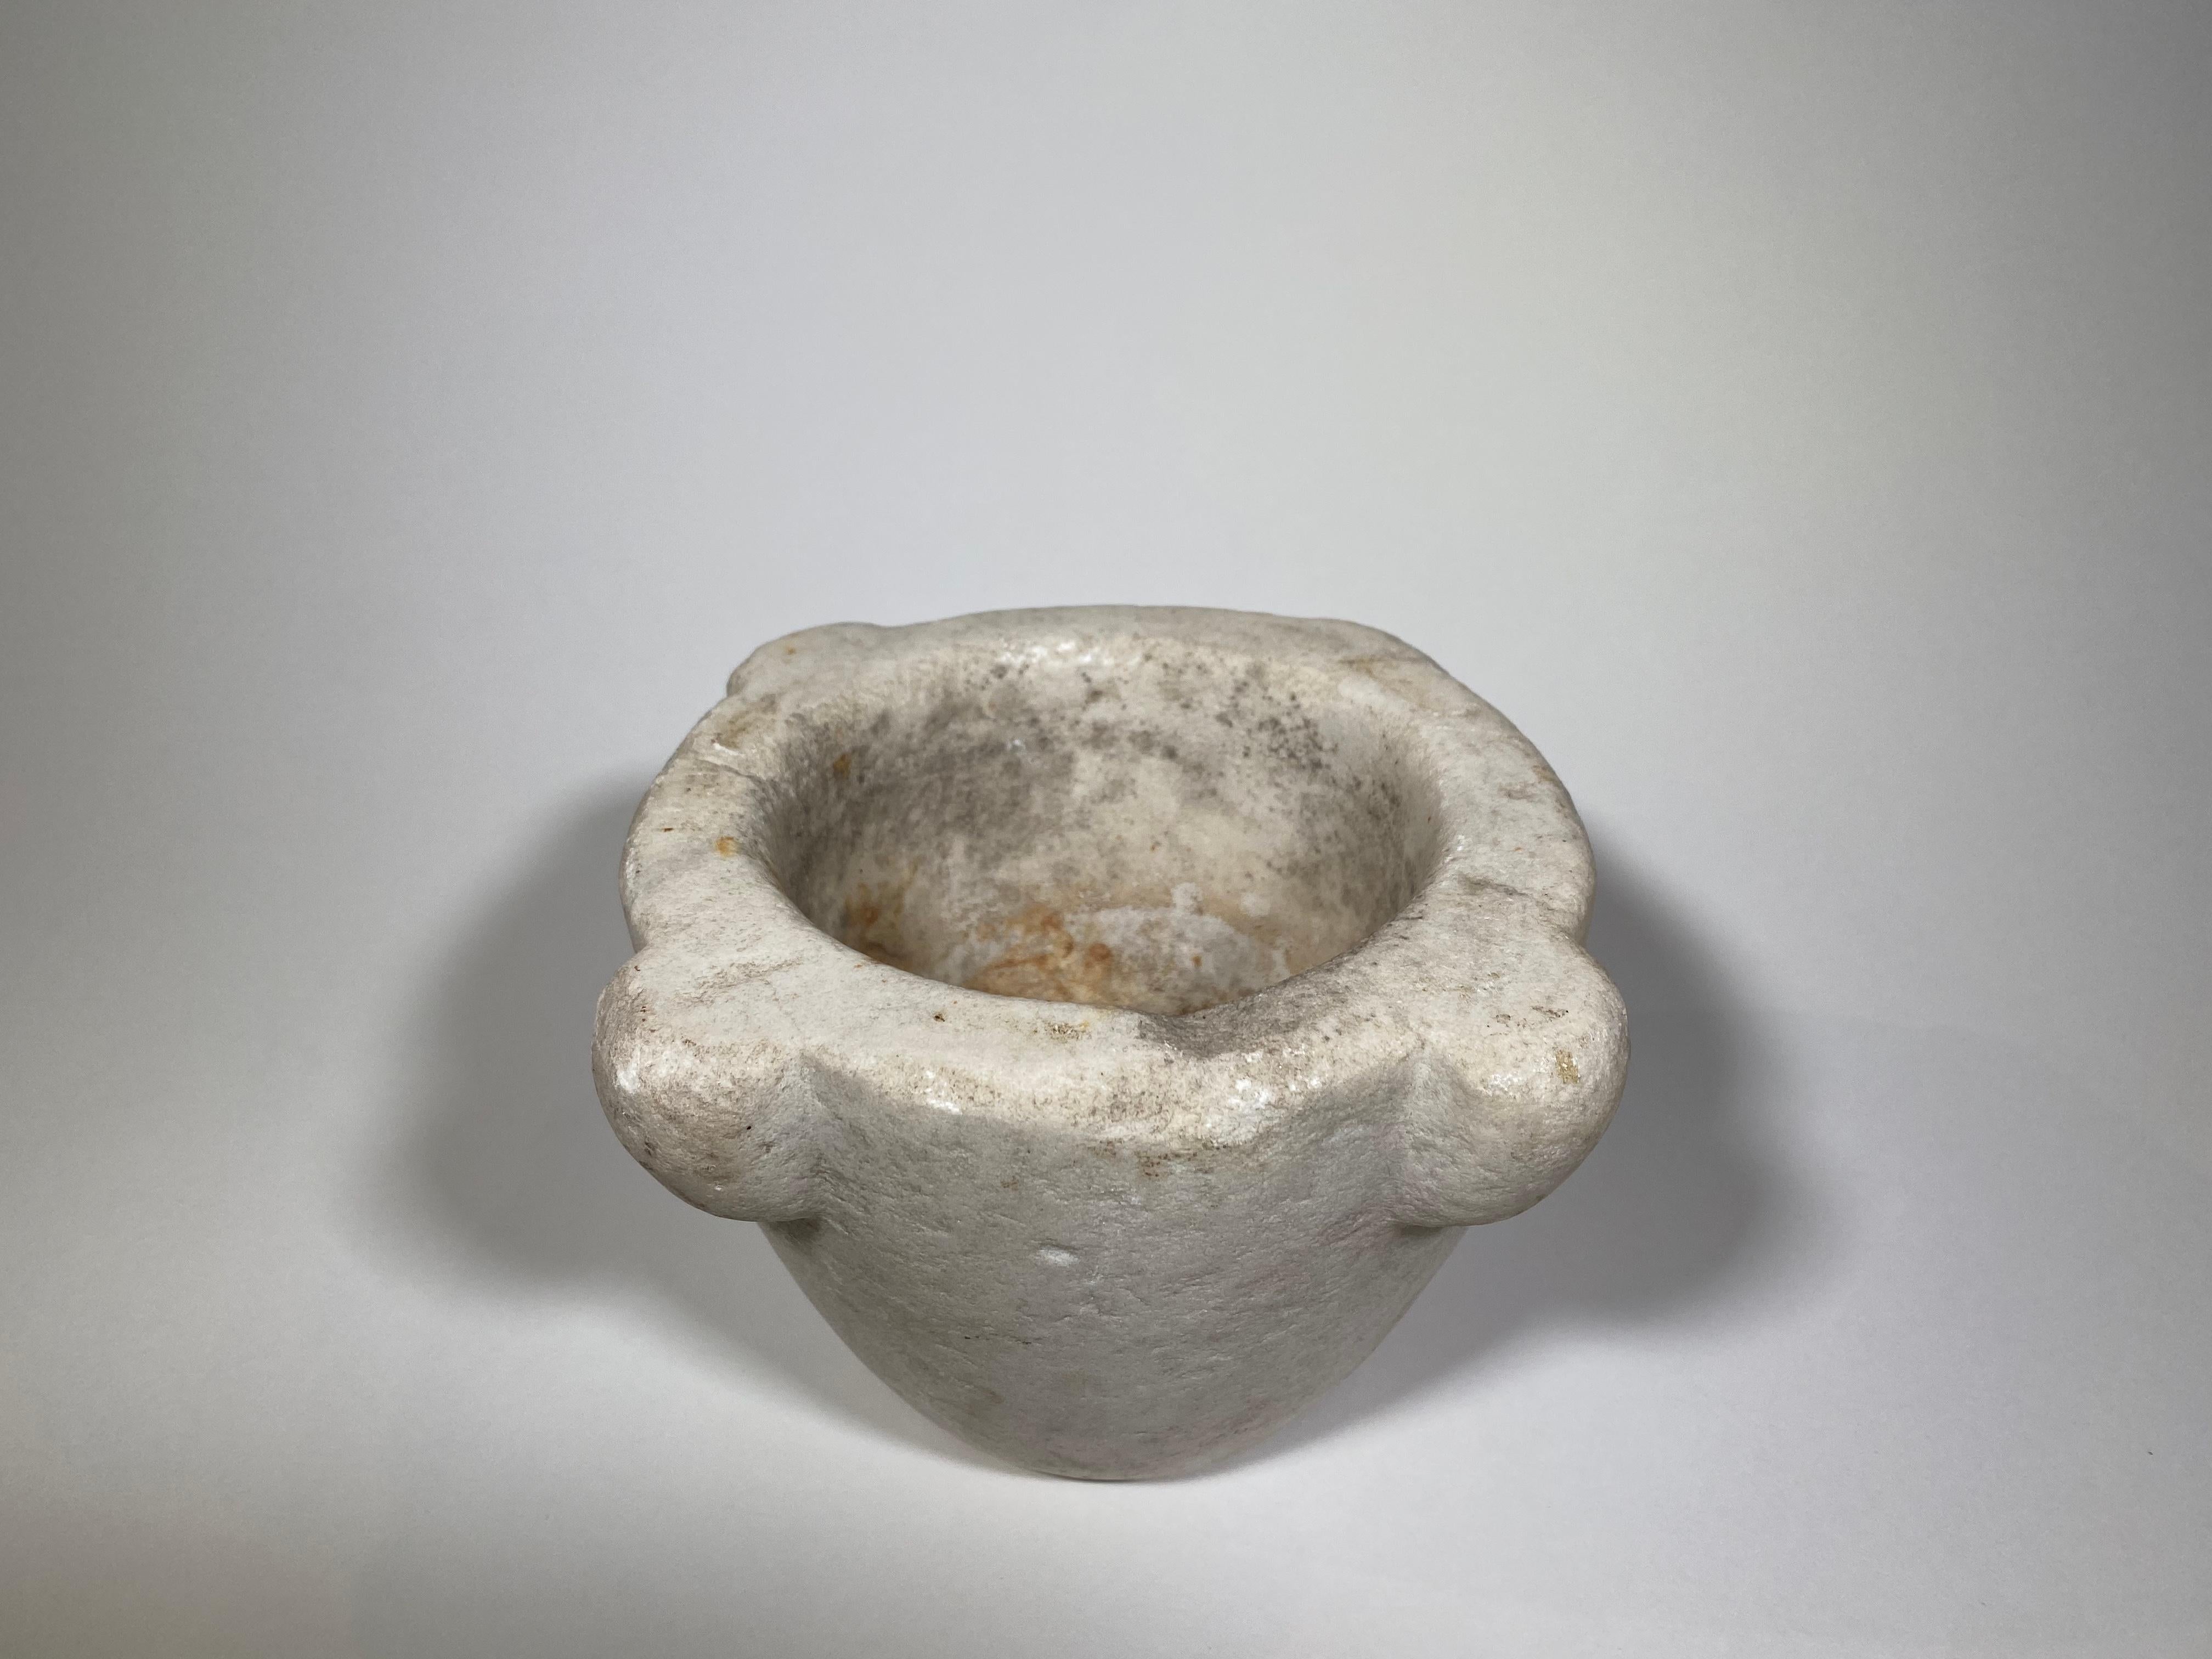 A very charming 18th century mortar from the Catalan region in Spain. Beautifully carved from marble. A wonderful accessory piece for any kitchen, bathroom, or table top.